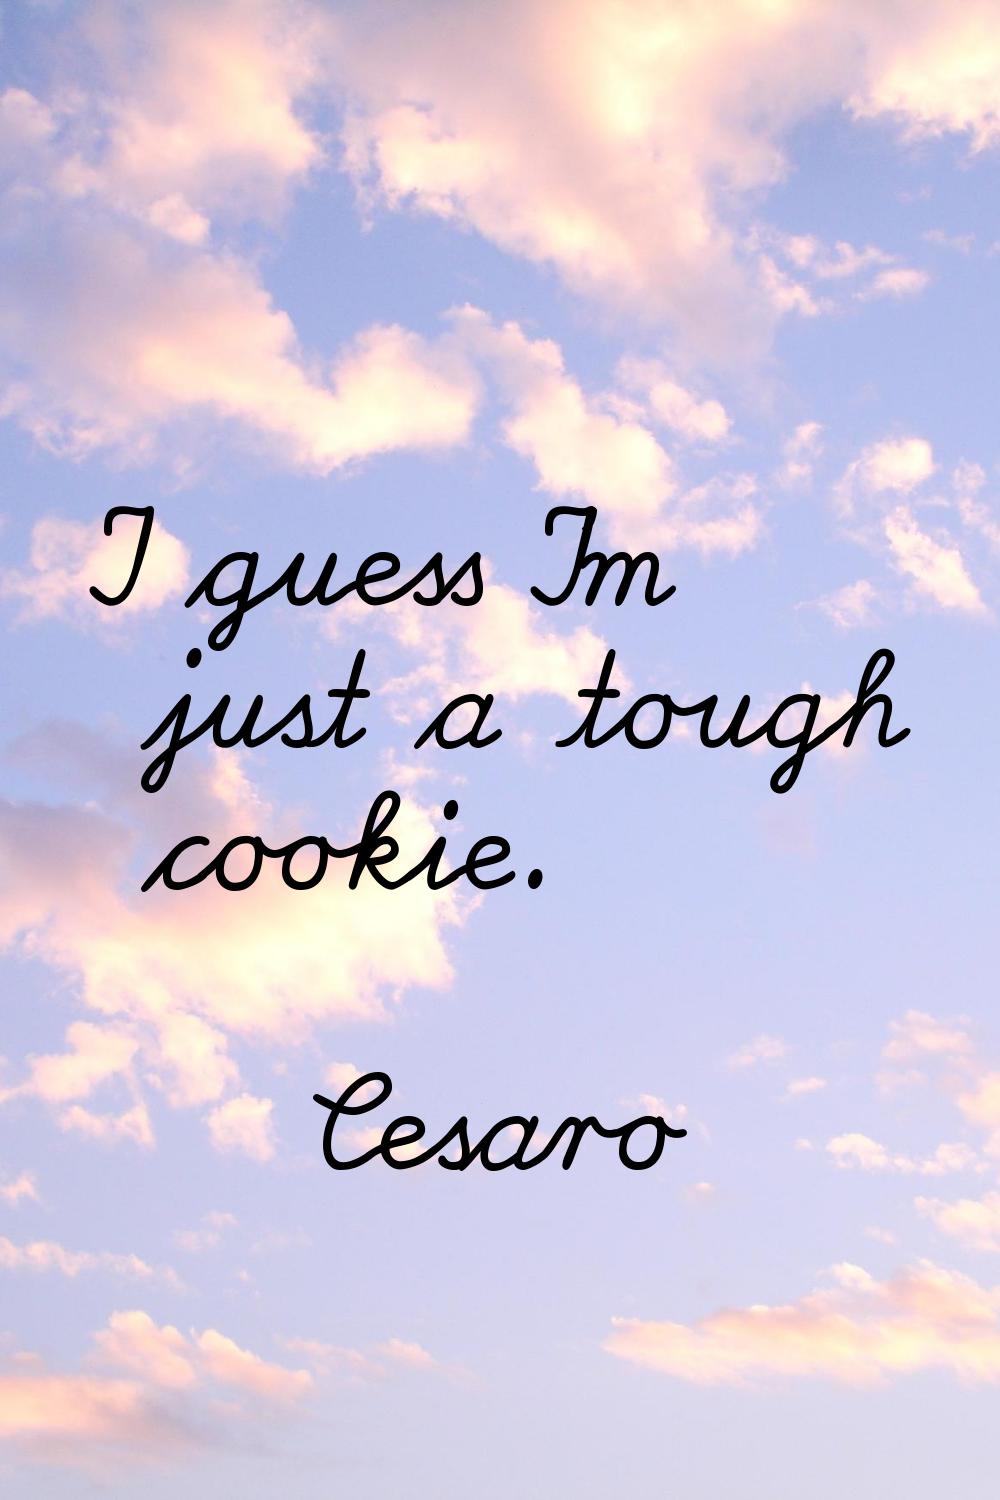 I guess I'm just a tough cookie.